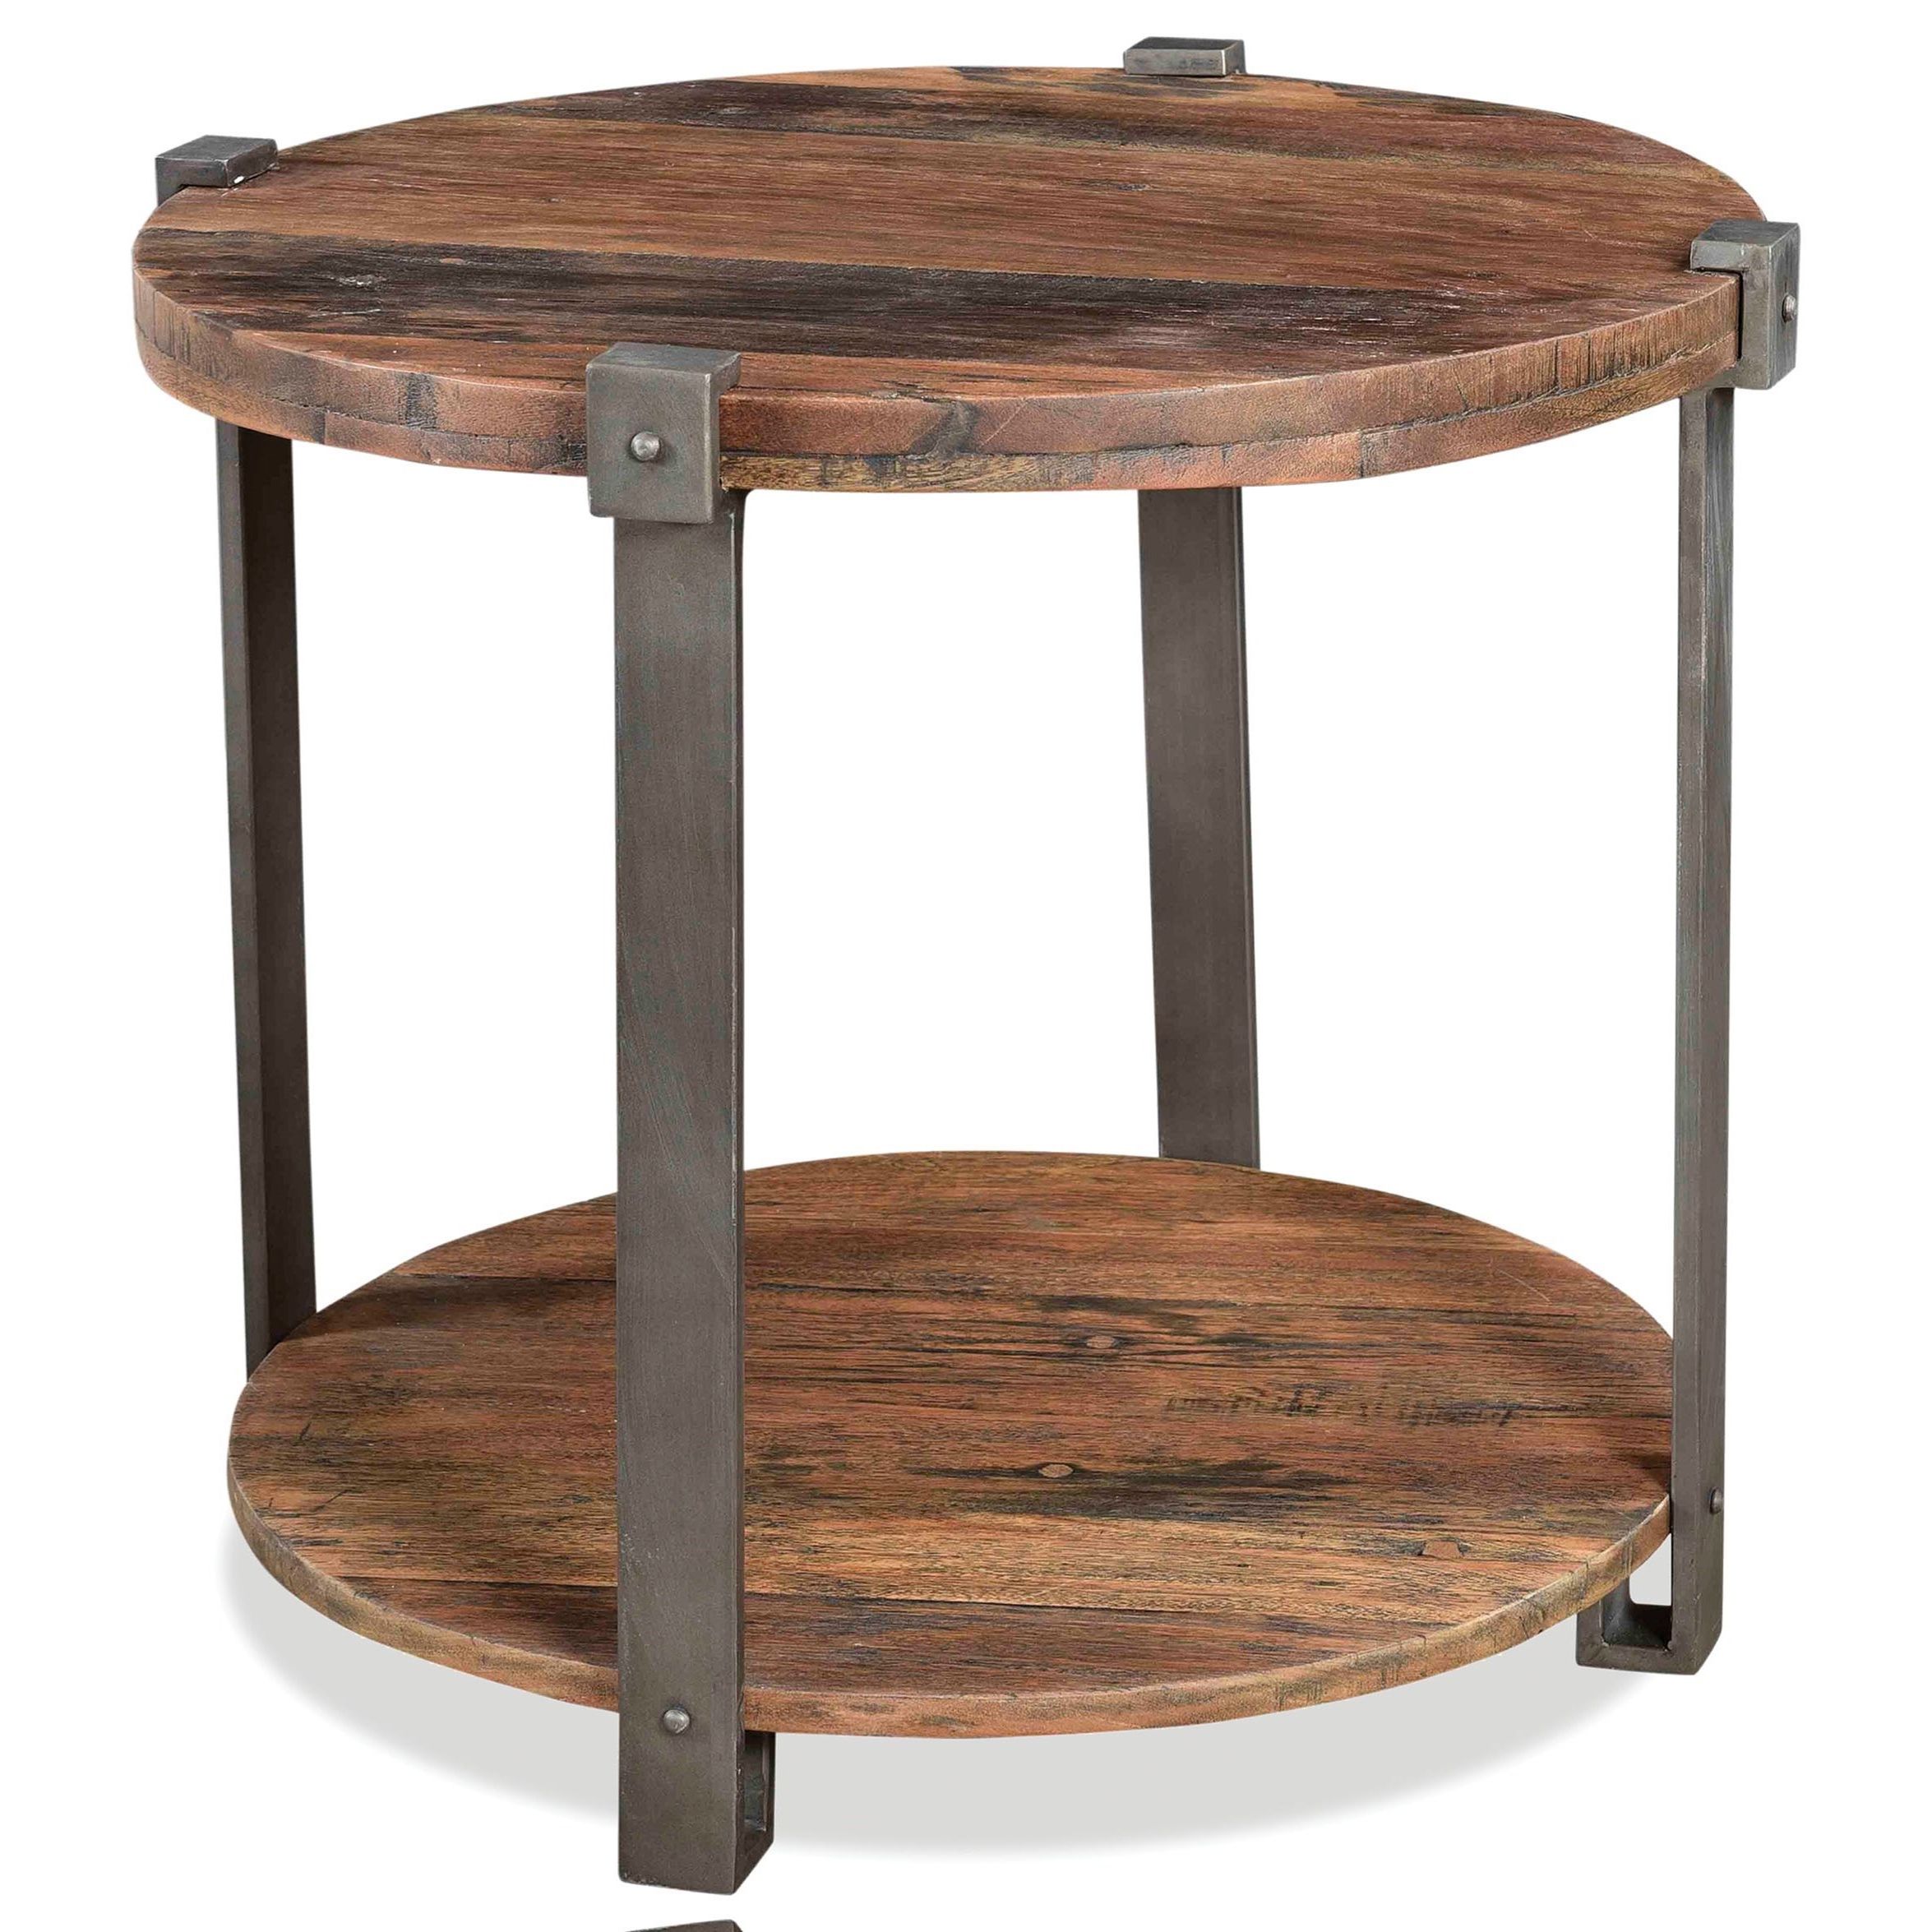 Riverside Furniture Quinton Rustic Round Side Table With Within Most Up To Date Rustic Bronze Patina Console Tables (View 10 of 10)